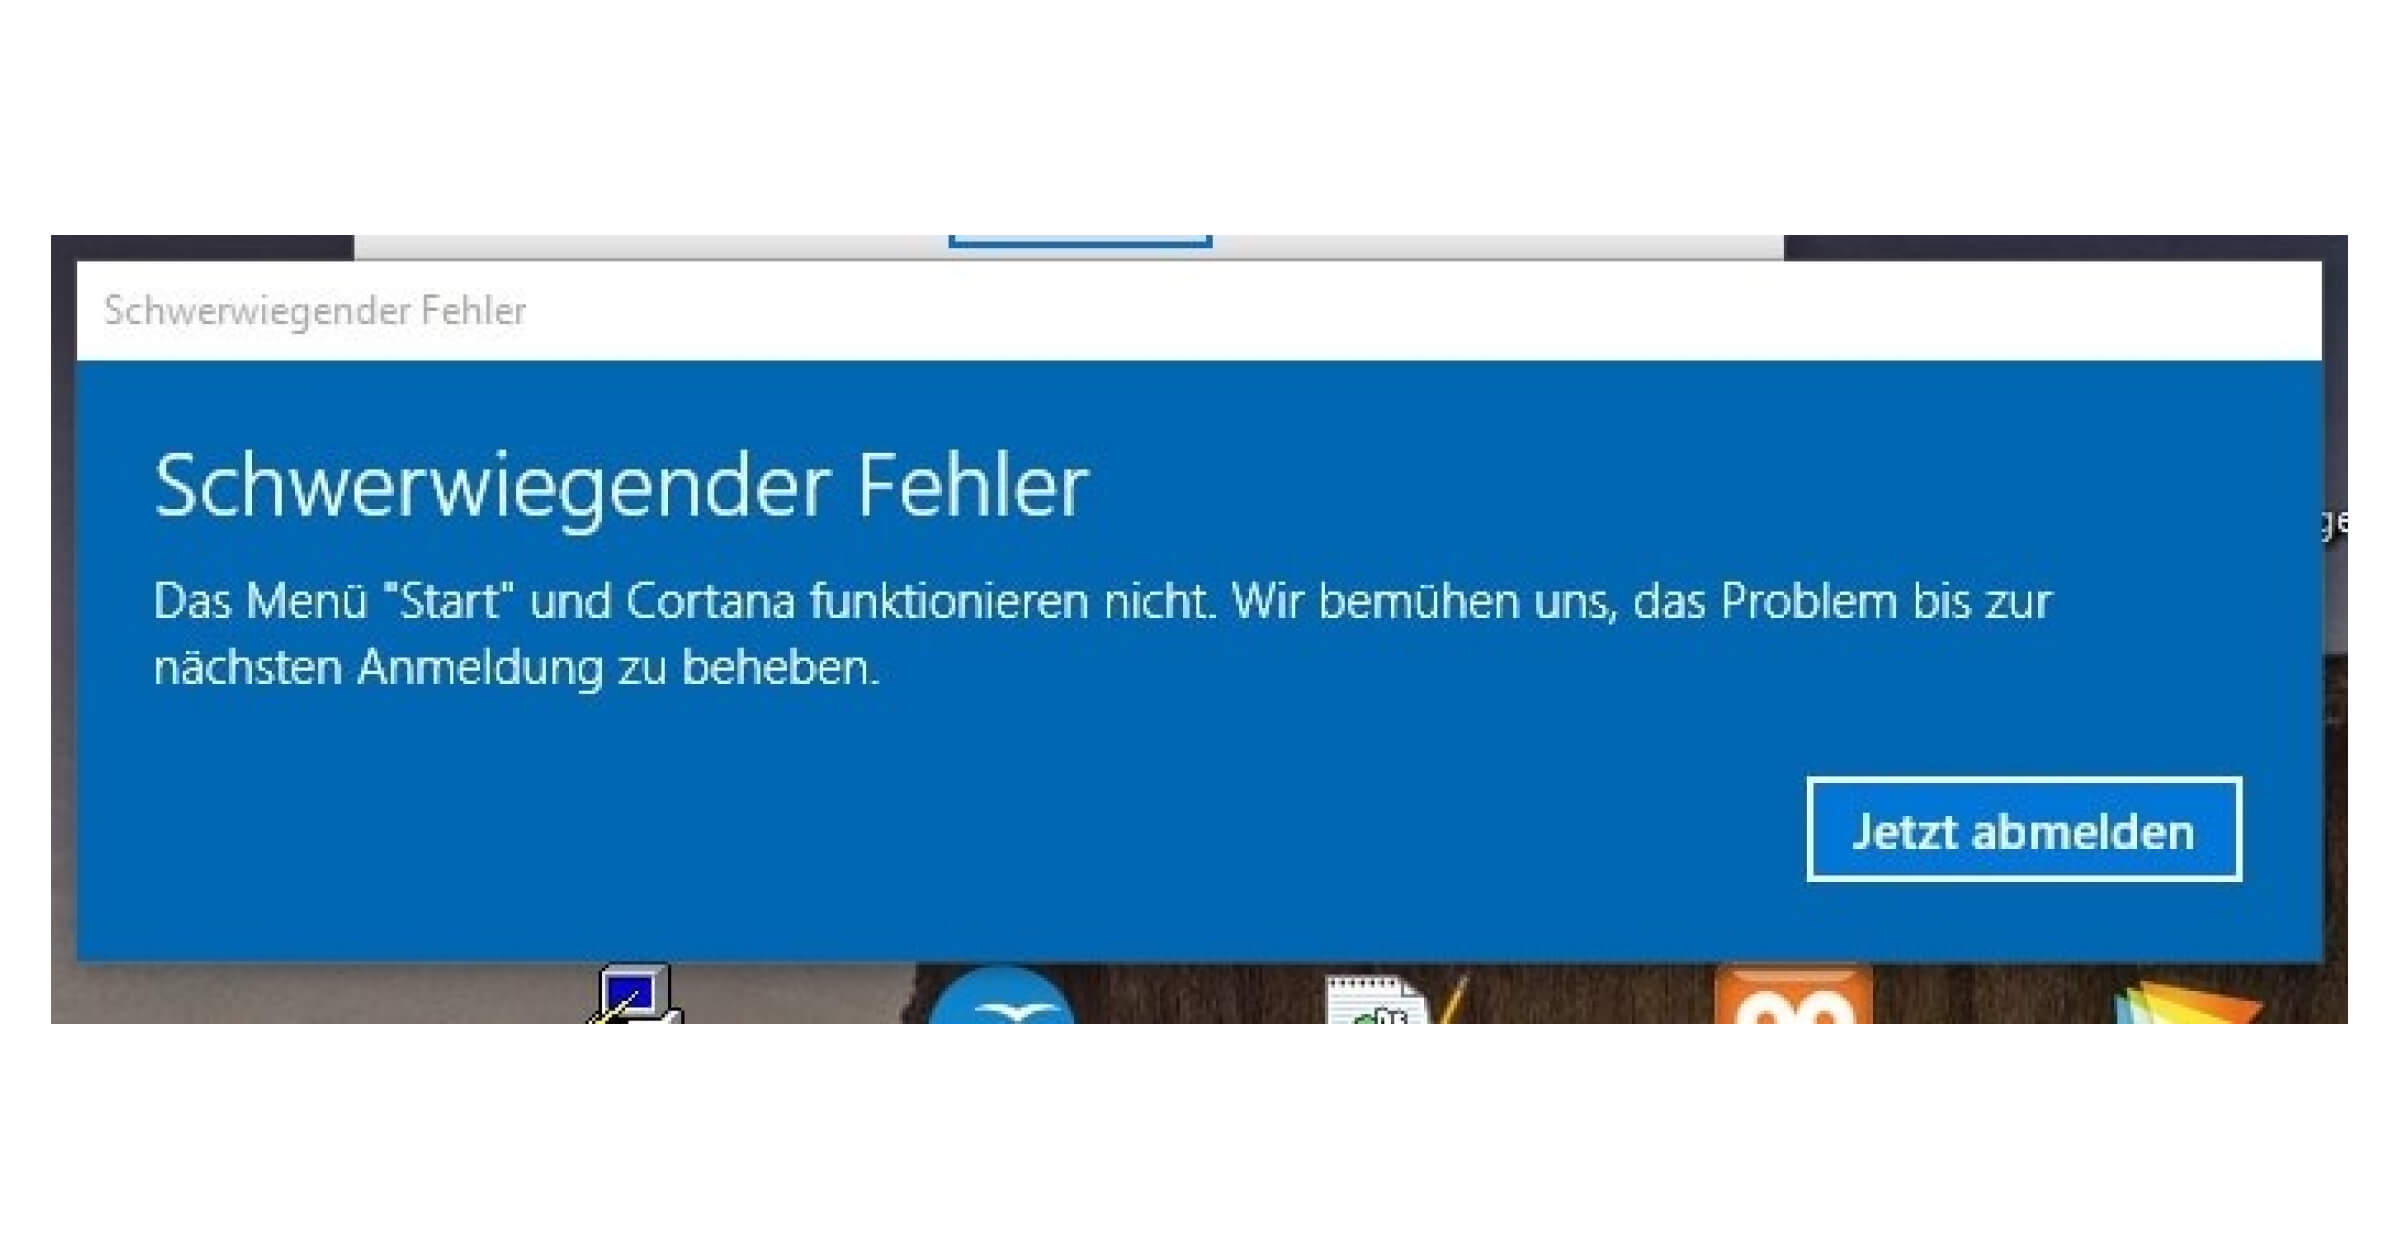 If Start and Cortana are not working on Windows 10, you will see this message